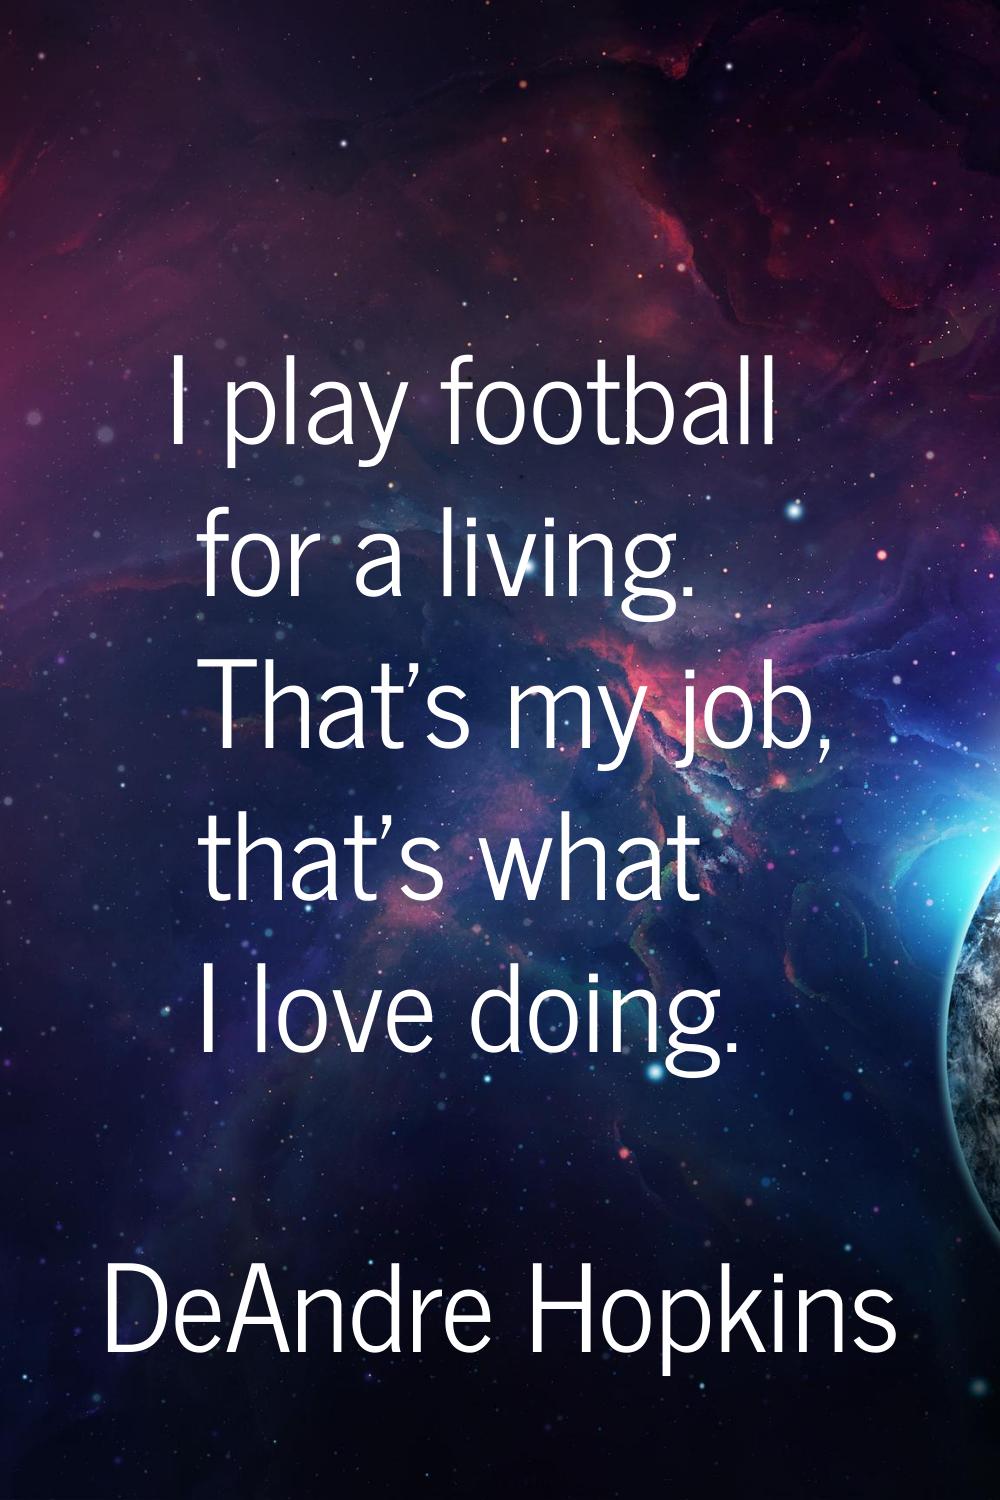 I play football for a living. That's my job, that's what I love doing.